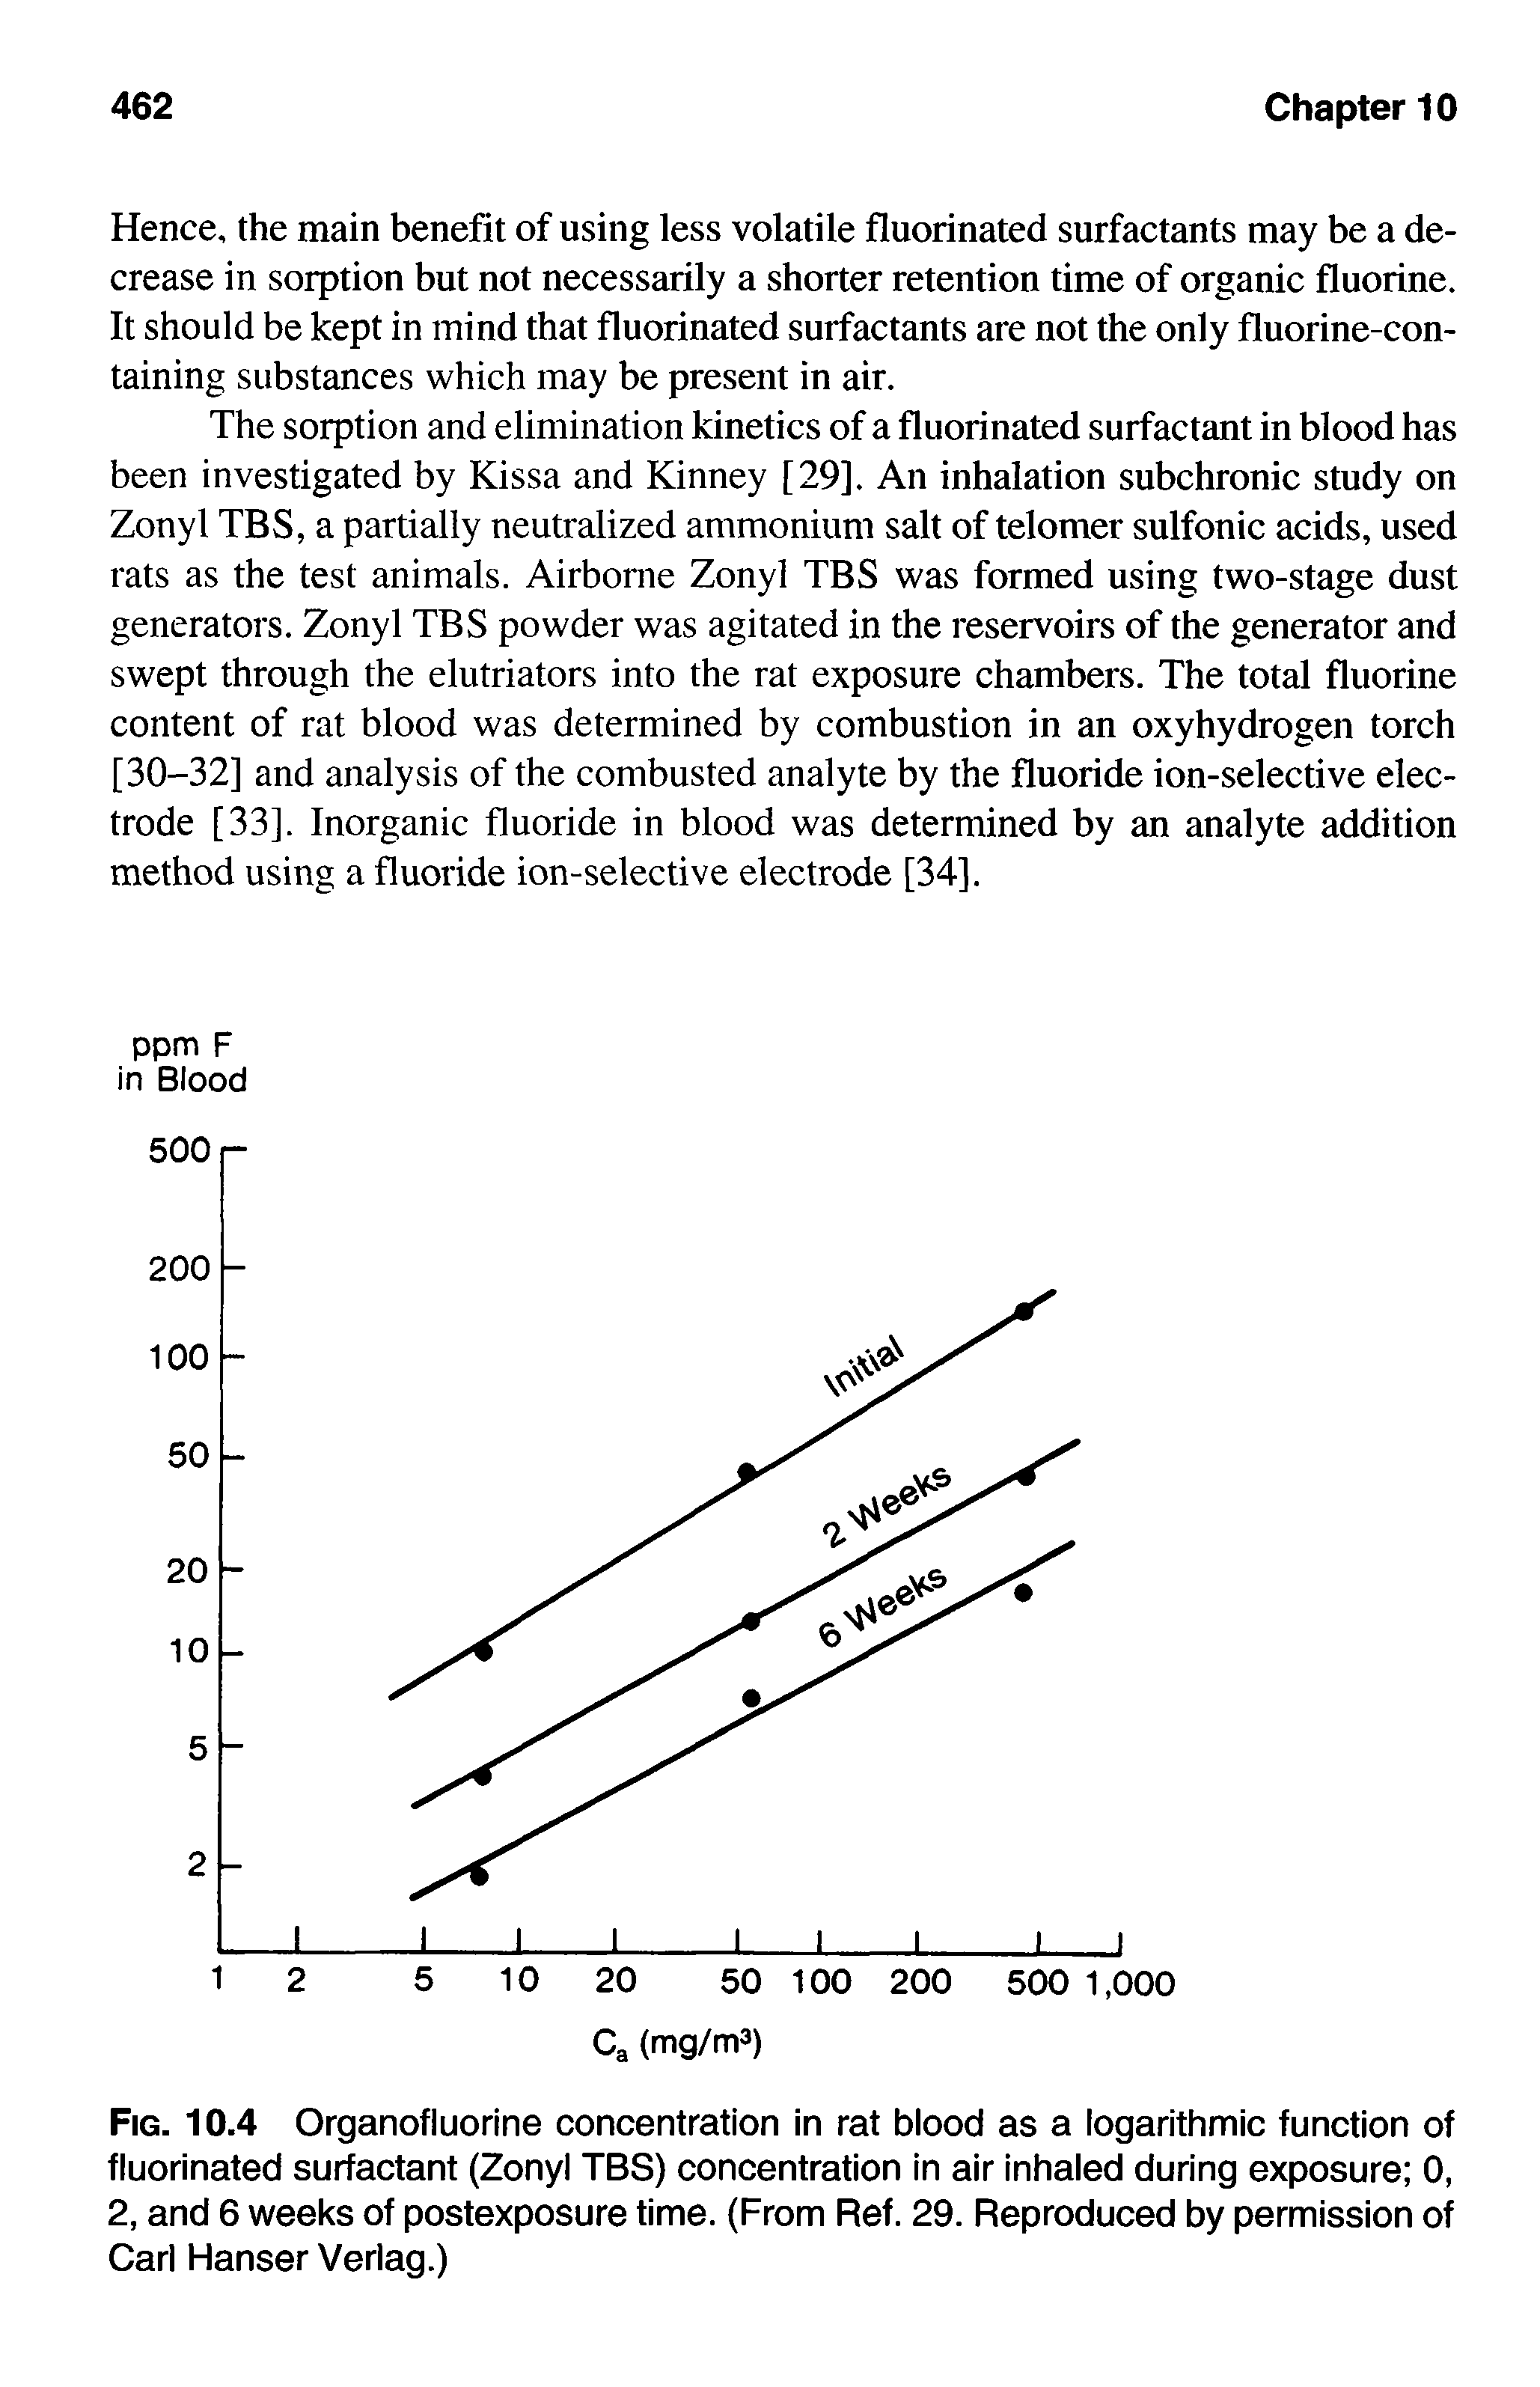 Fig. 10.4 Organofluorine concentration in rat blood as a logarithmic function of fluorinated surfactant (Zonyl TBS) concentration in air inhaled during exposure 0, 2, and 6 weeks of postexposure time. (From Ref. 29. Reproduced by permission of Carl Hanser Verlag.)...